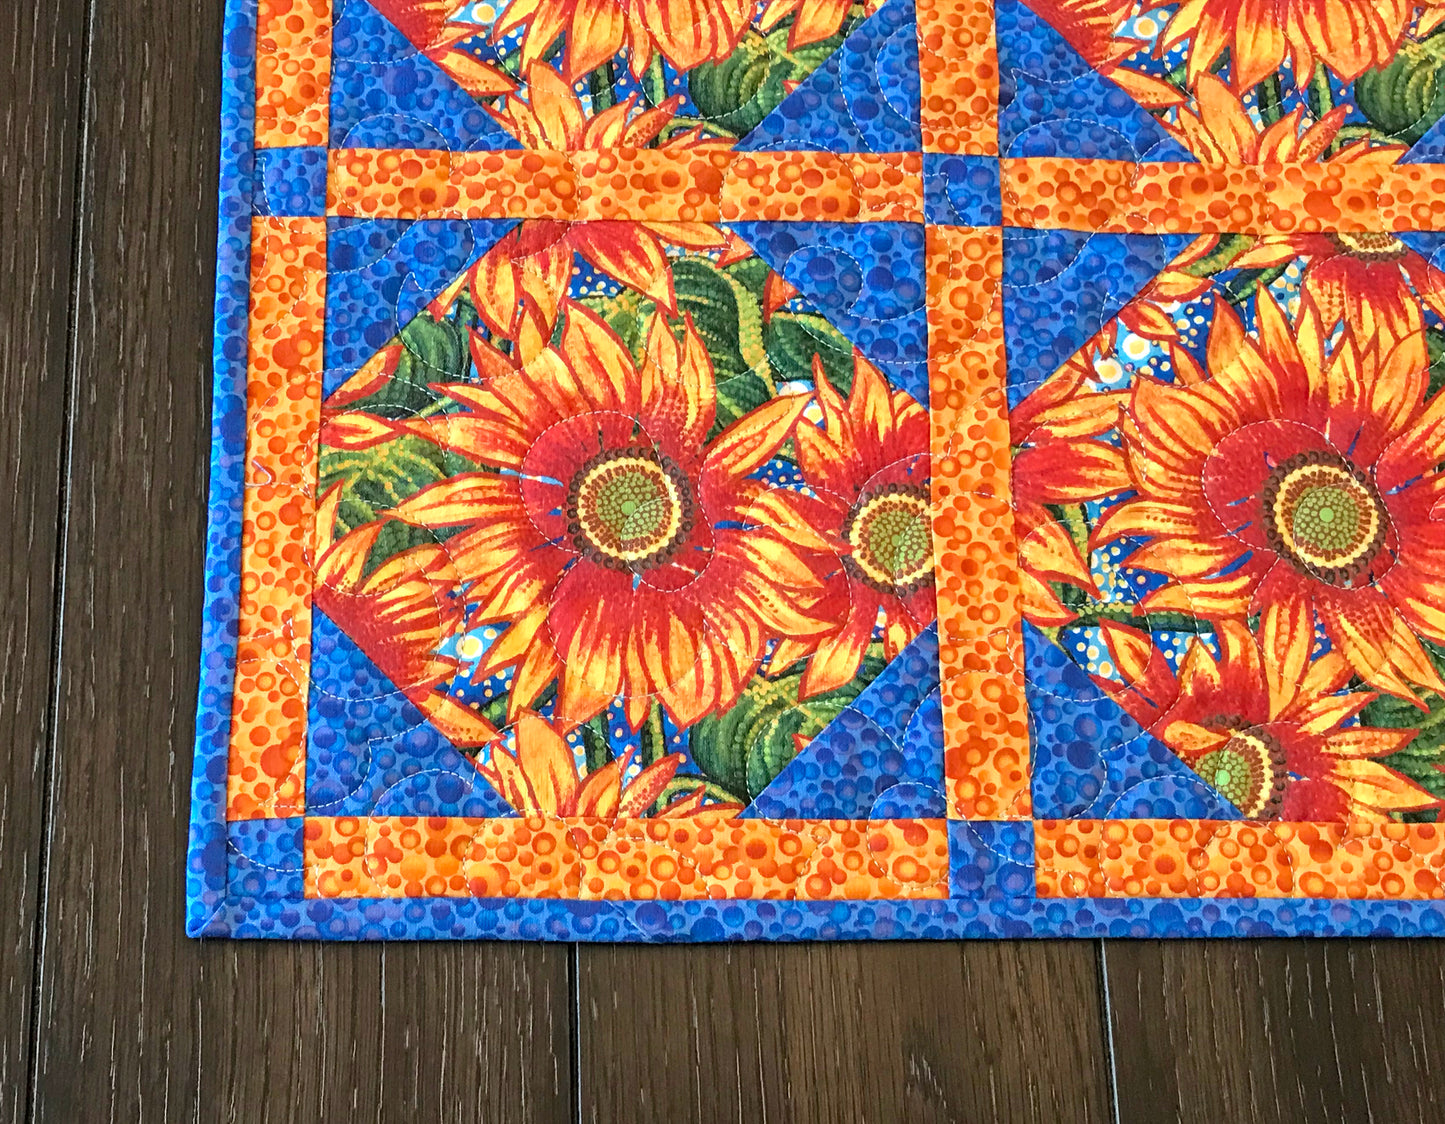 Sunflower Themed Table Topper - Handmade Quilts, Digital Patterns, and Home Décor items online - Cuddle Cat Quiltworks